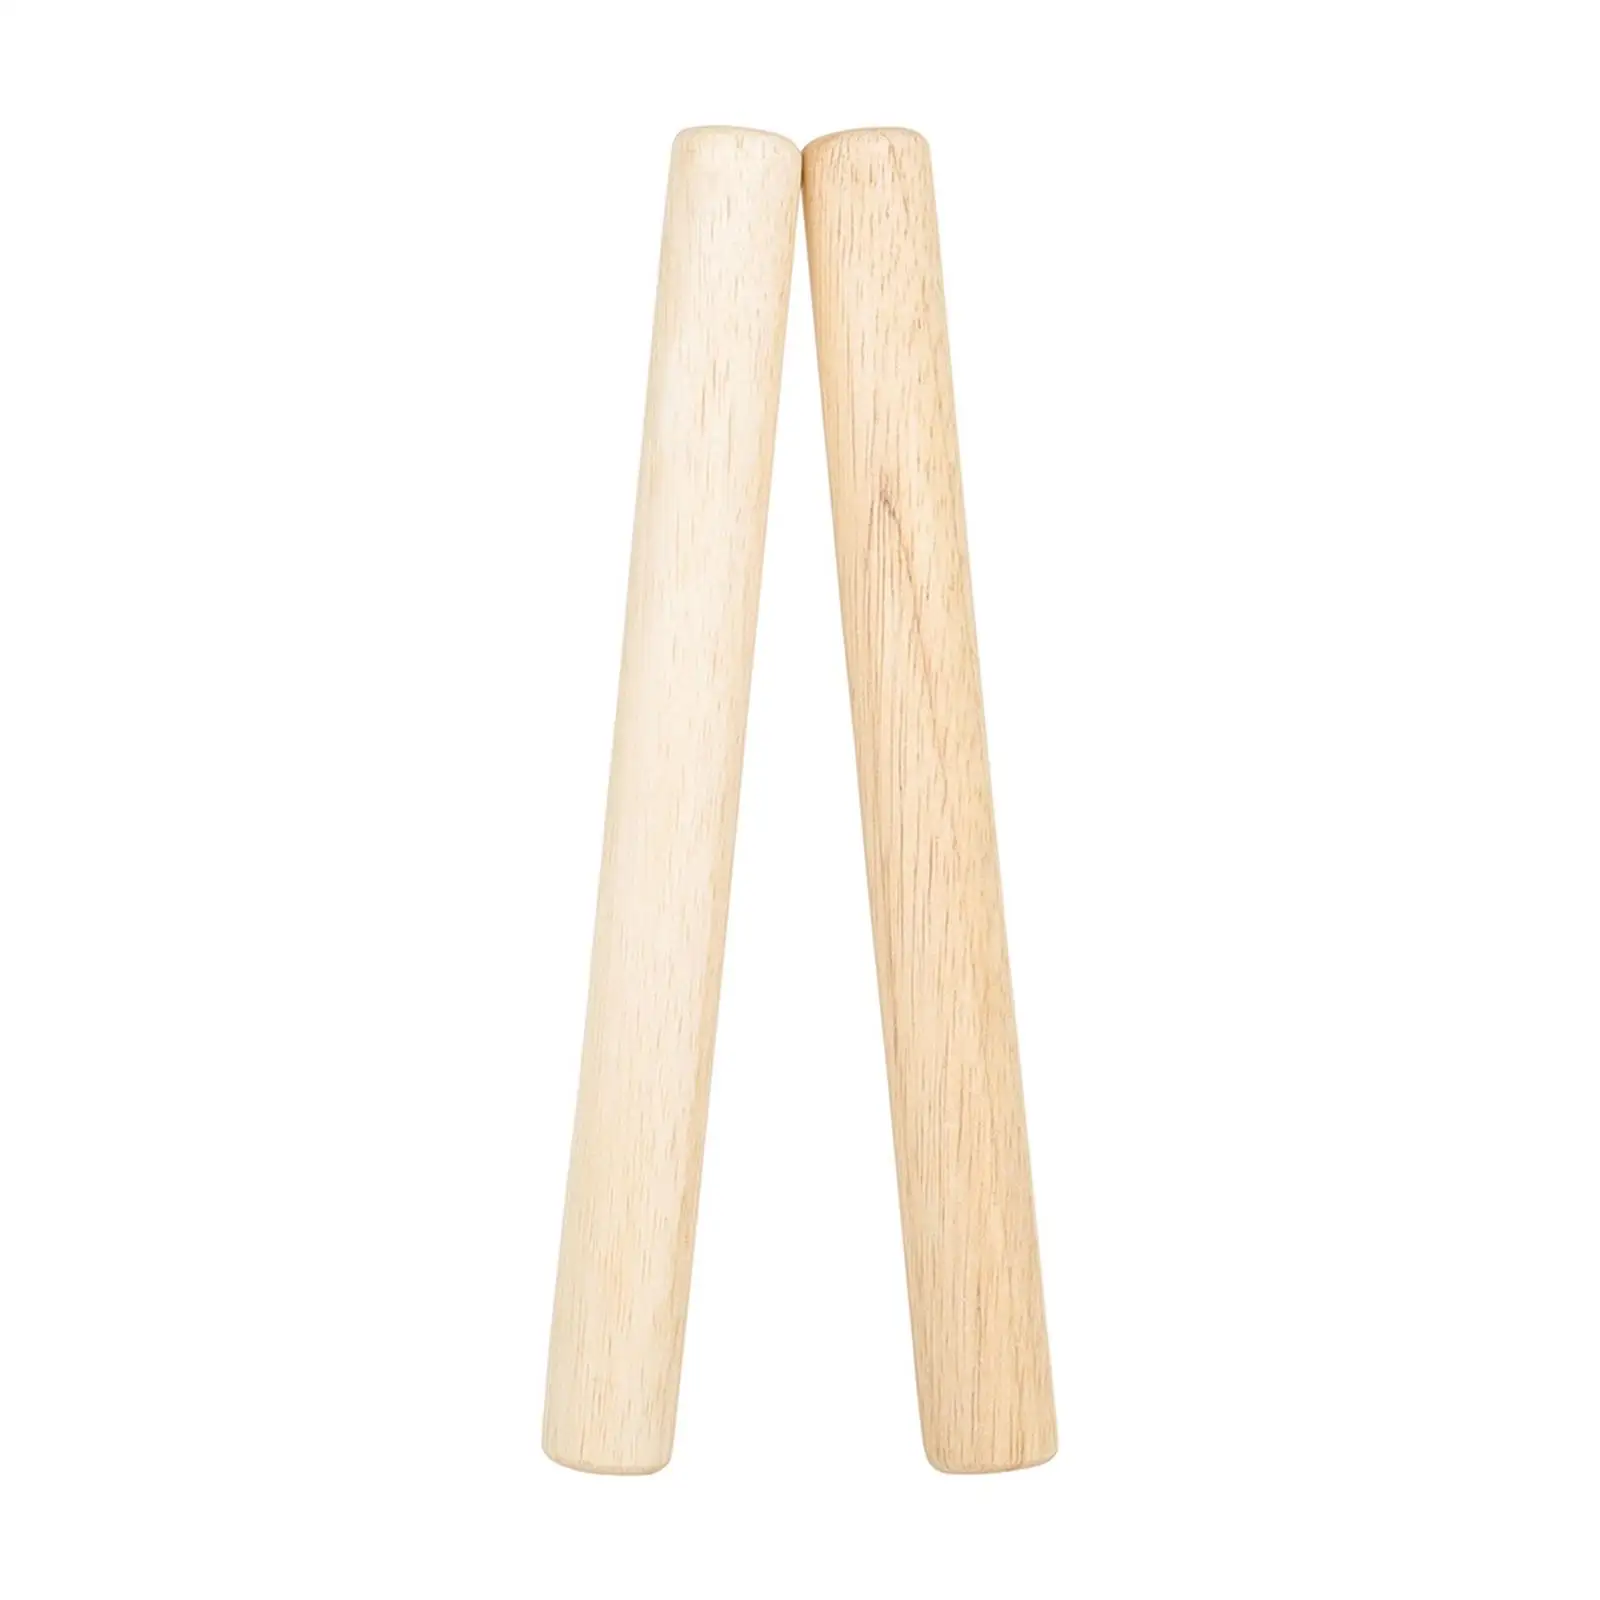 2Pcs Wooden Drum Sticks Percussion Instrument Accessories Percussion Toy Musical Toy Drumsticks for Beginner Kids Boys Girls